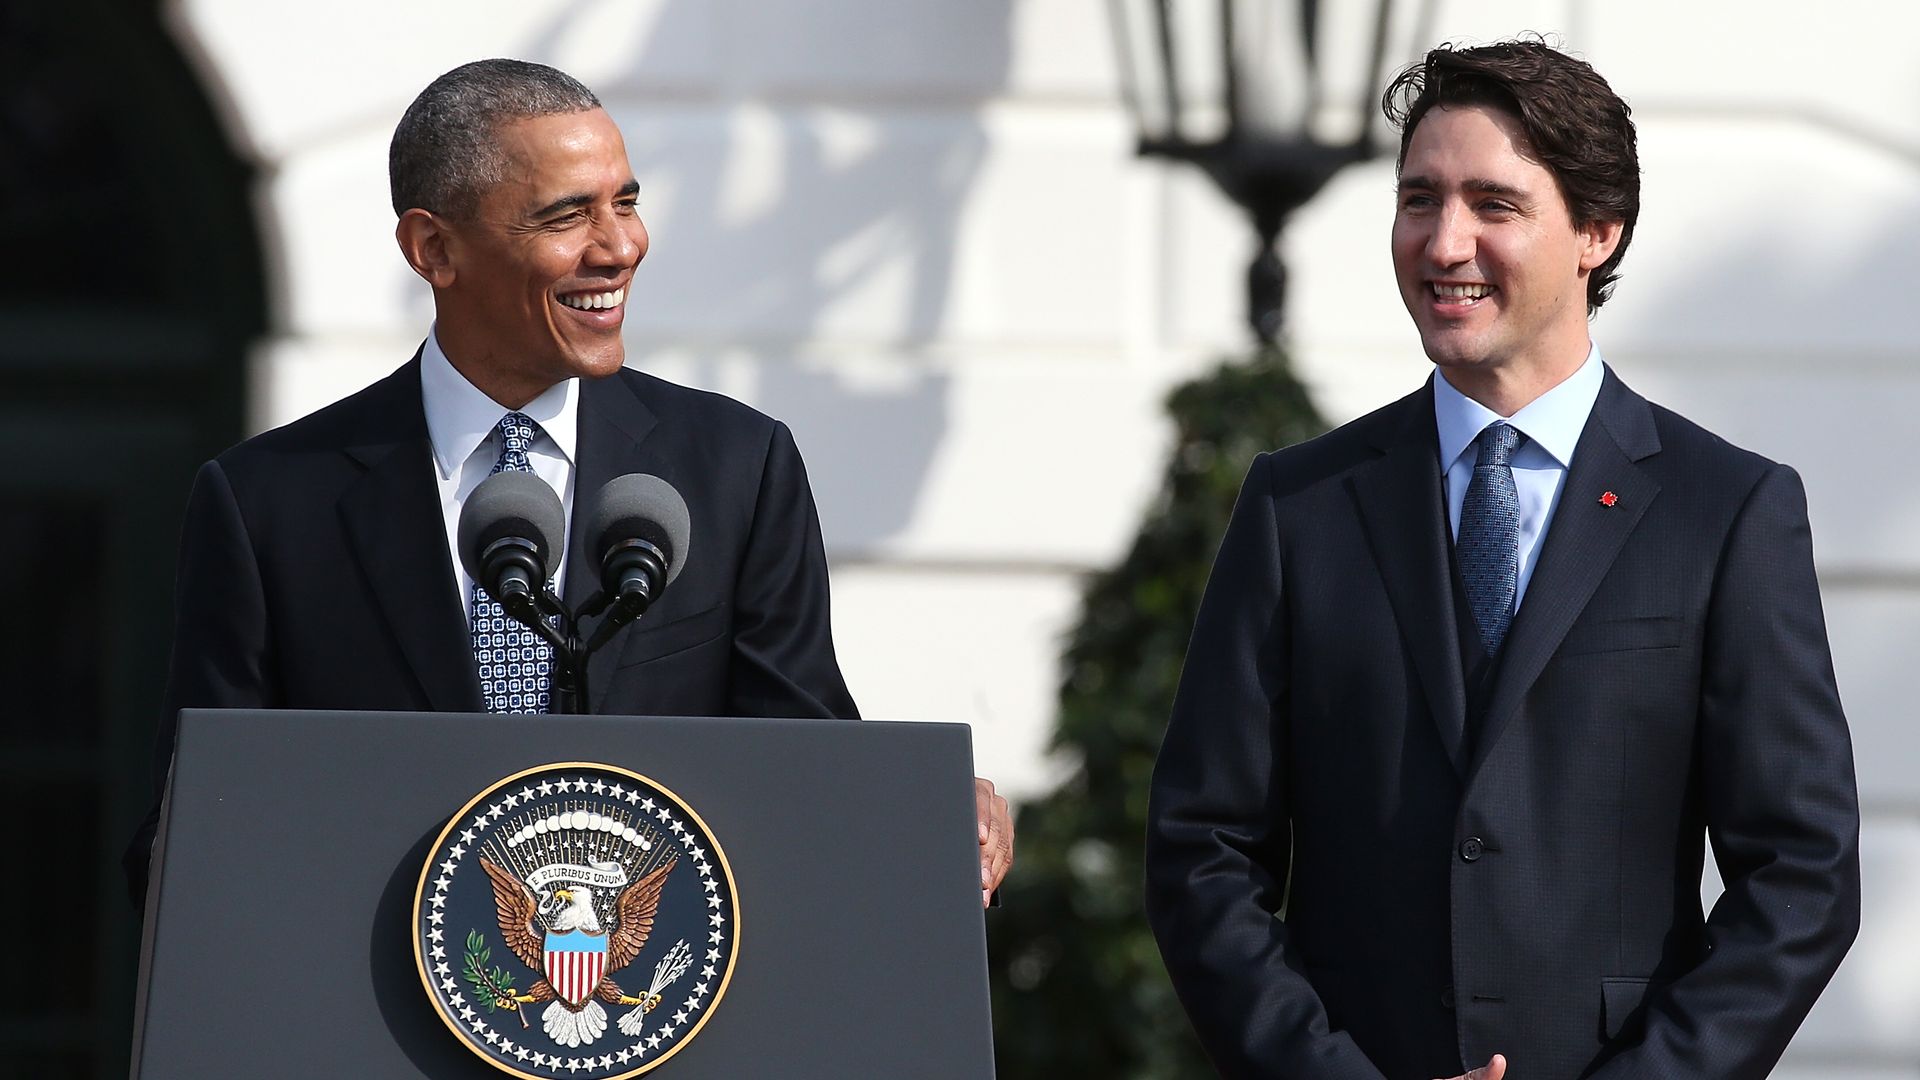 Barack Obama speaks about the location of the Stanley Cup as he welcomes Canadian Prime Minister Justin Trudeau during an arrival ceremony on the South Lawn of the White House, March 10, 2016.